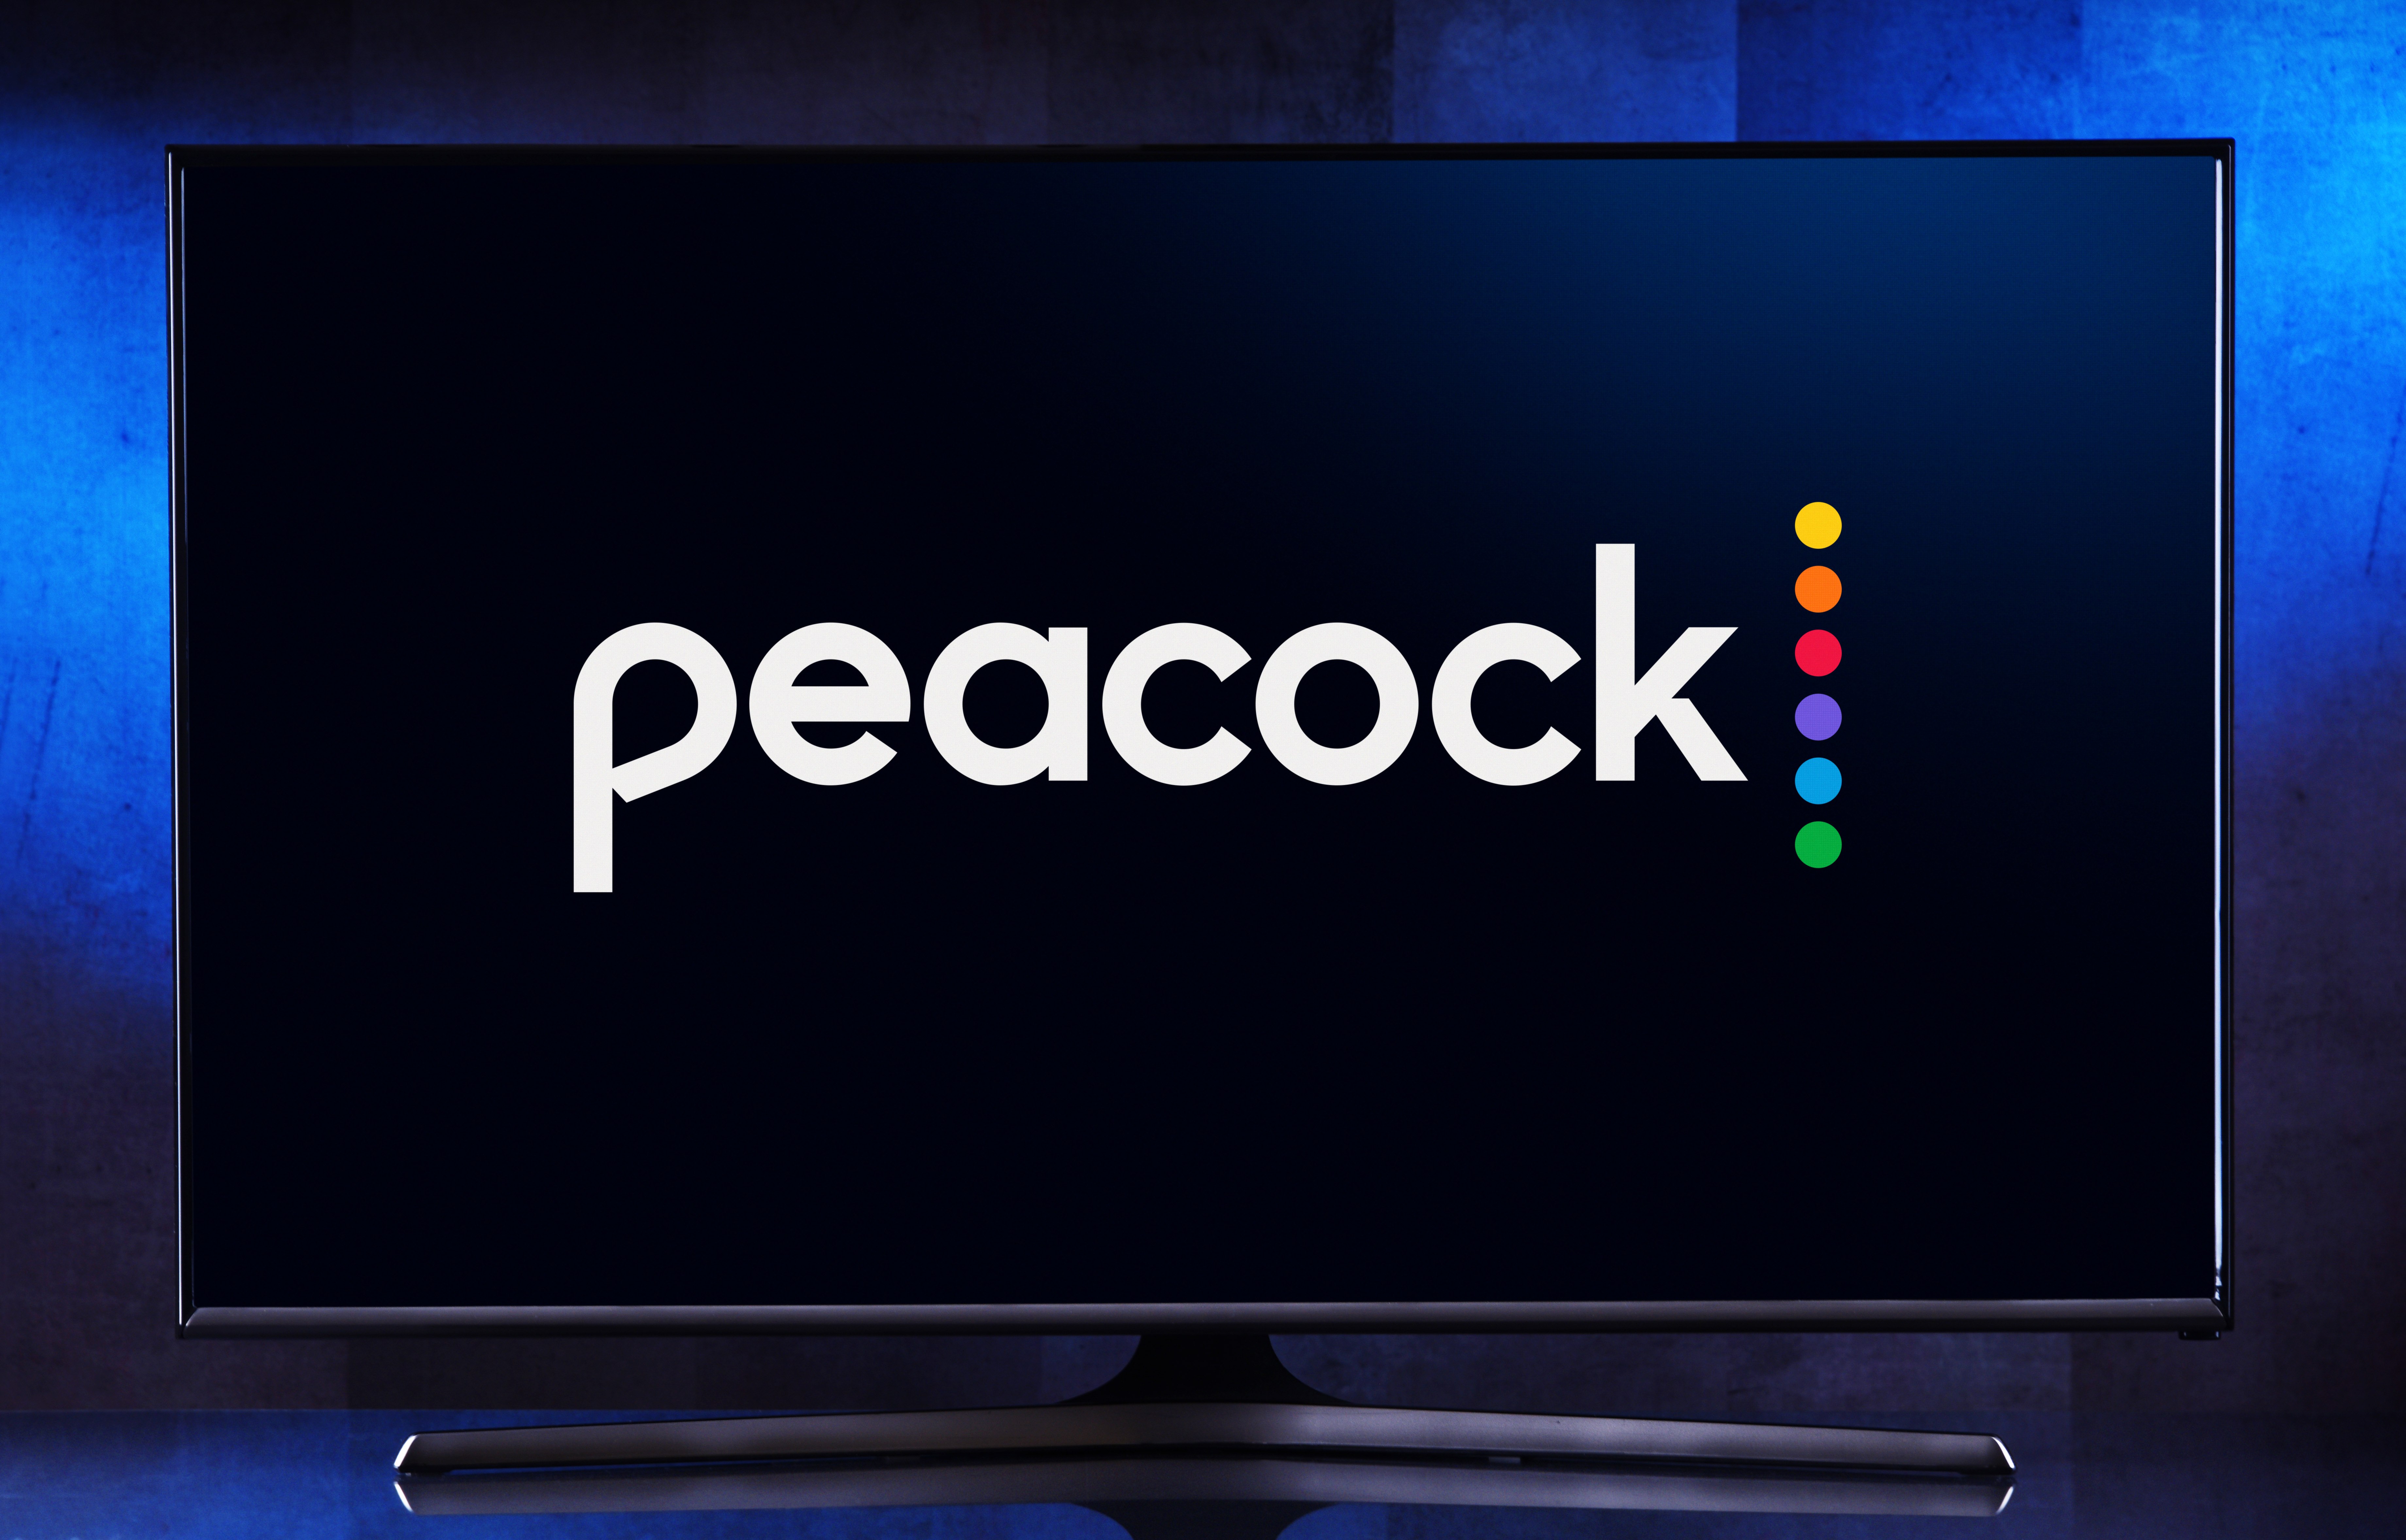 Get Peacock Premium for $3.80 Per Month for 12 Months Ahead of Wrestlemania